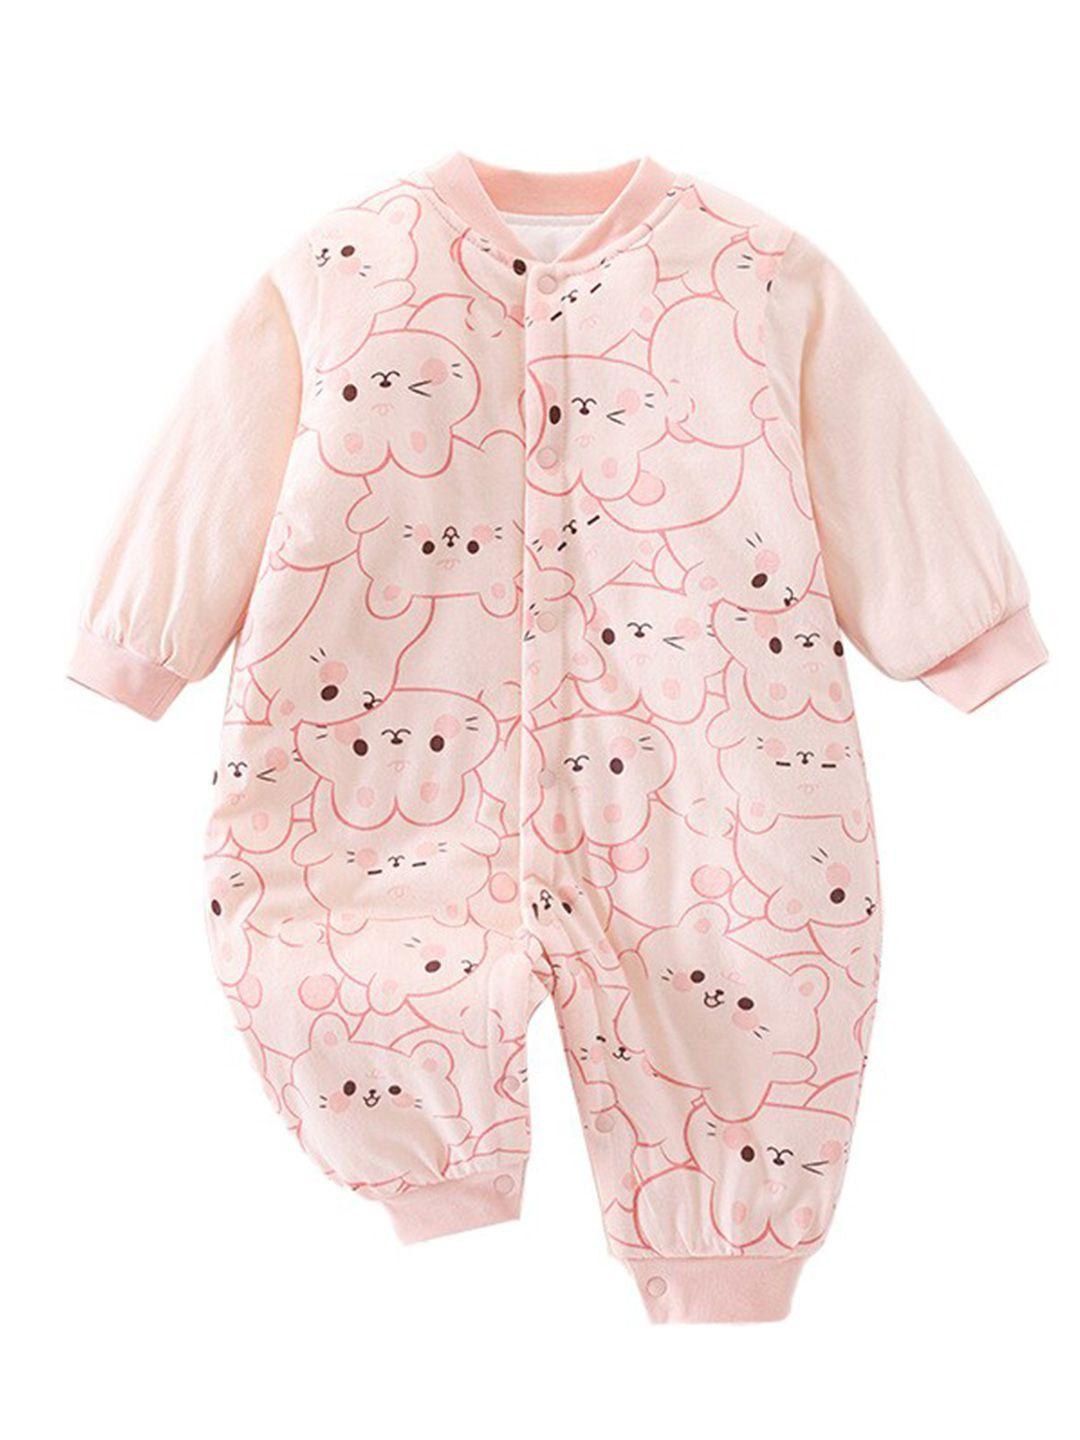 stylecast-infant-girls-printed-cotton-romper